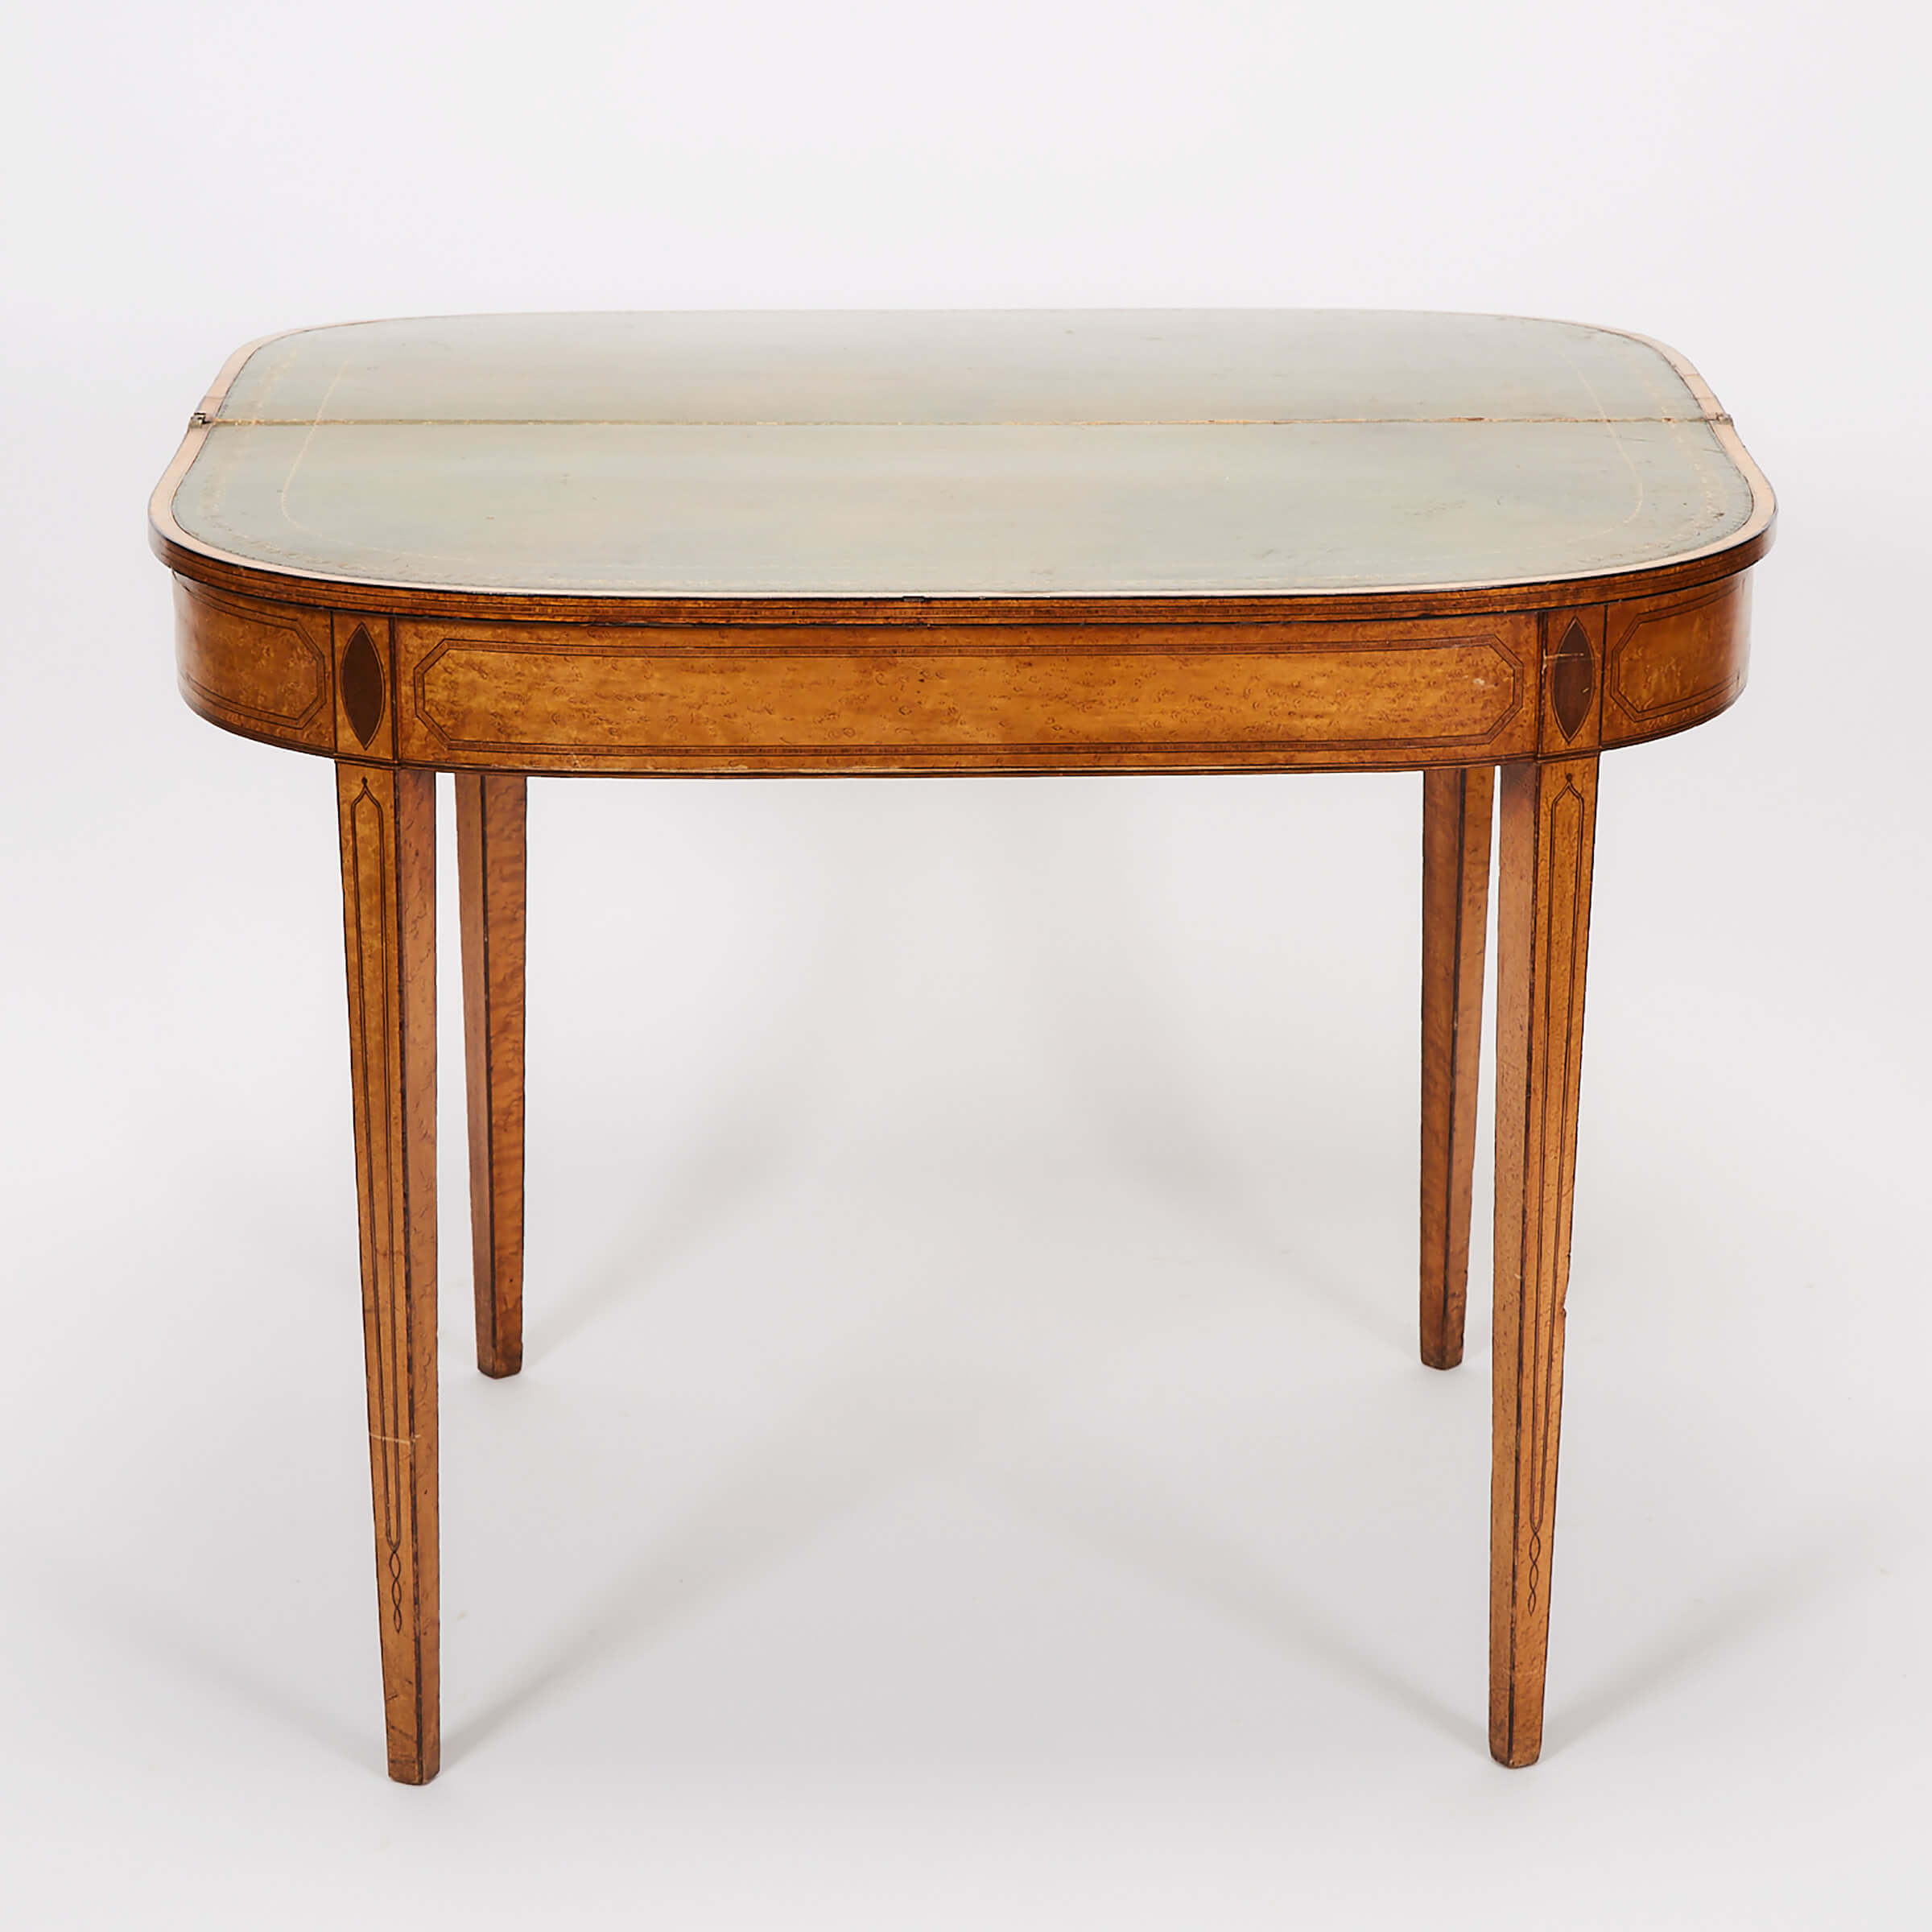 Hepplewhite Style Bird’s Eye Maple Games Table, early-mid 20th century